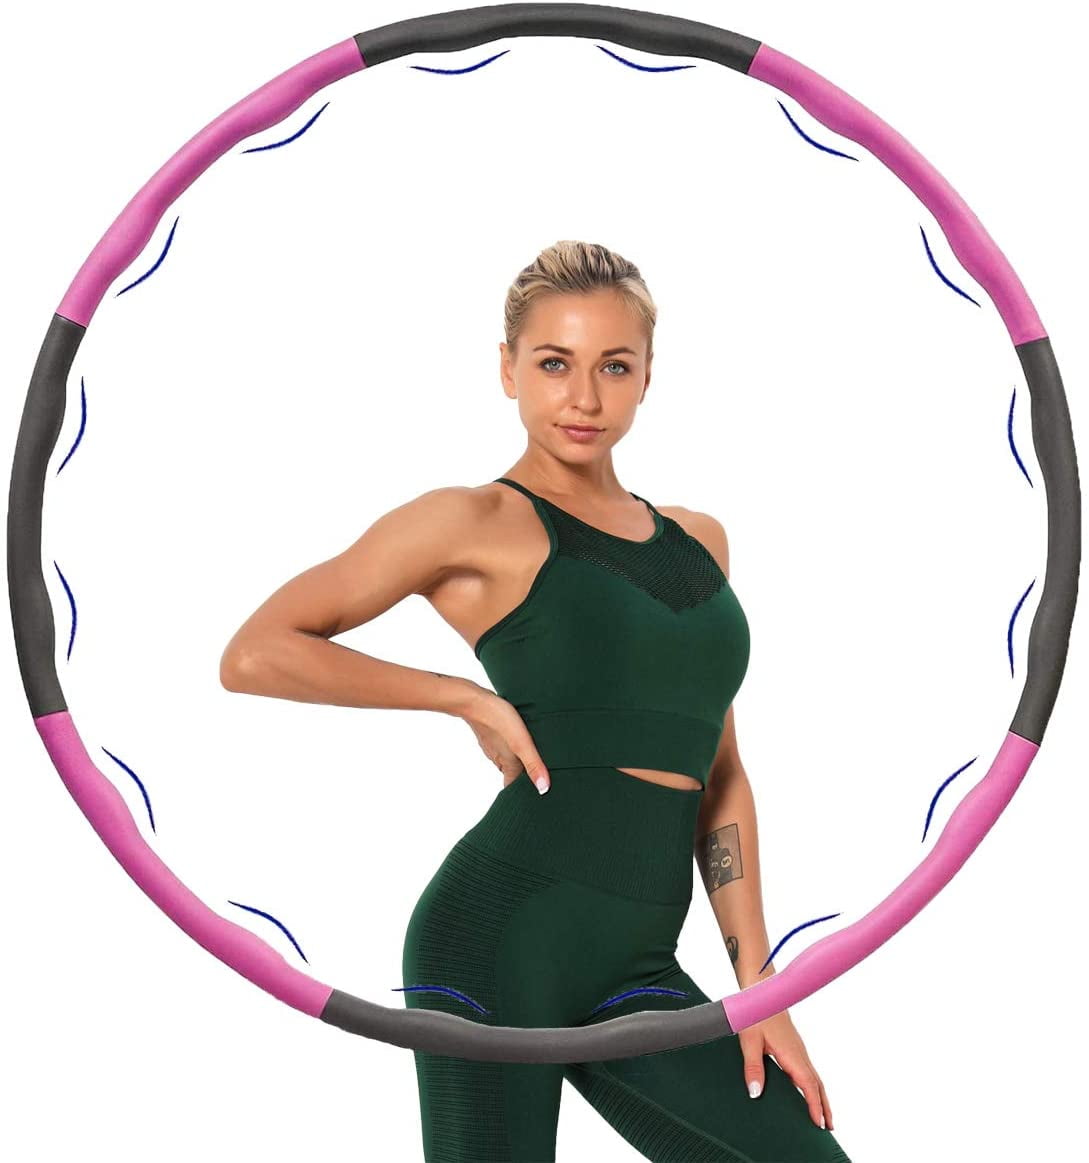 suitable for sports fitness and fat loss NEW A fitness tire Massage hula hoop 